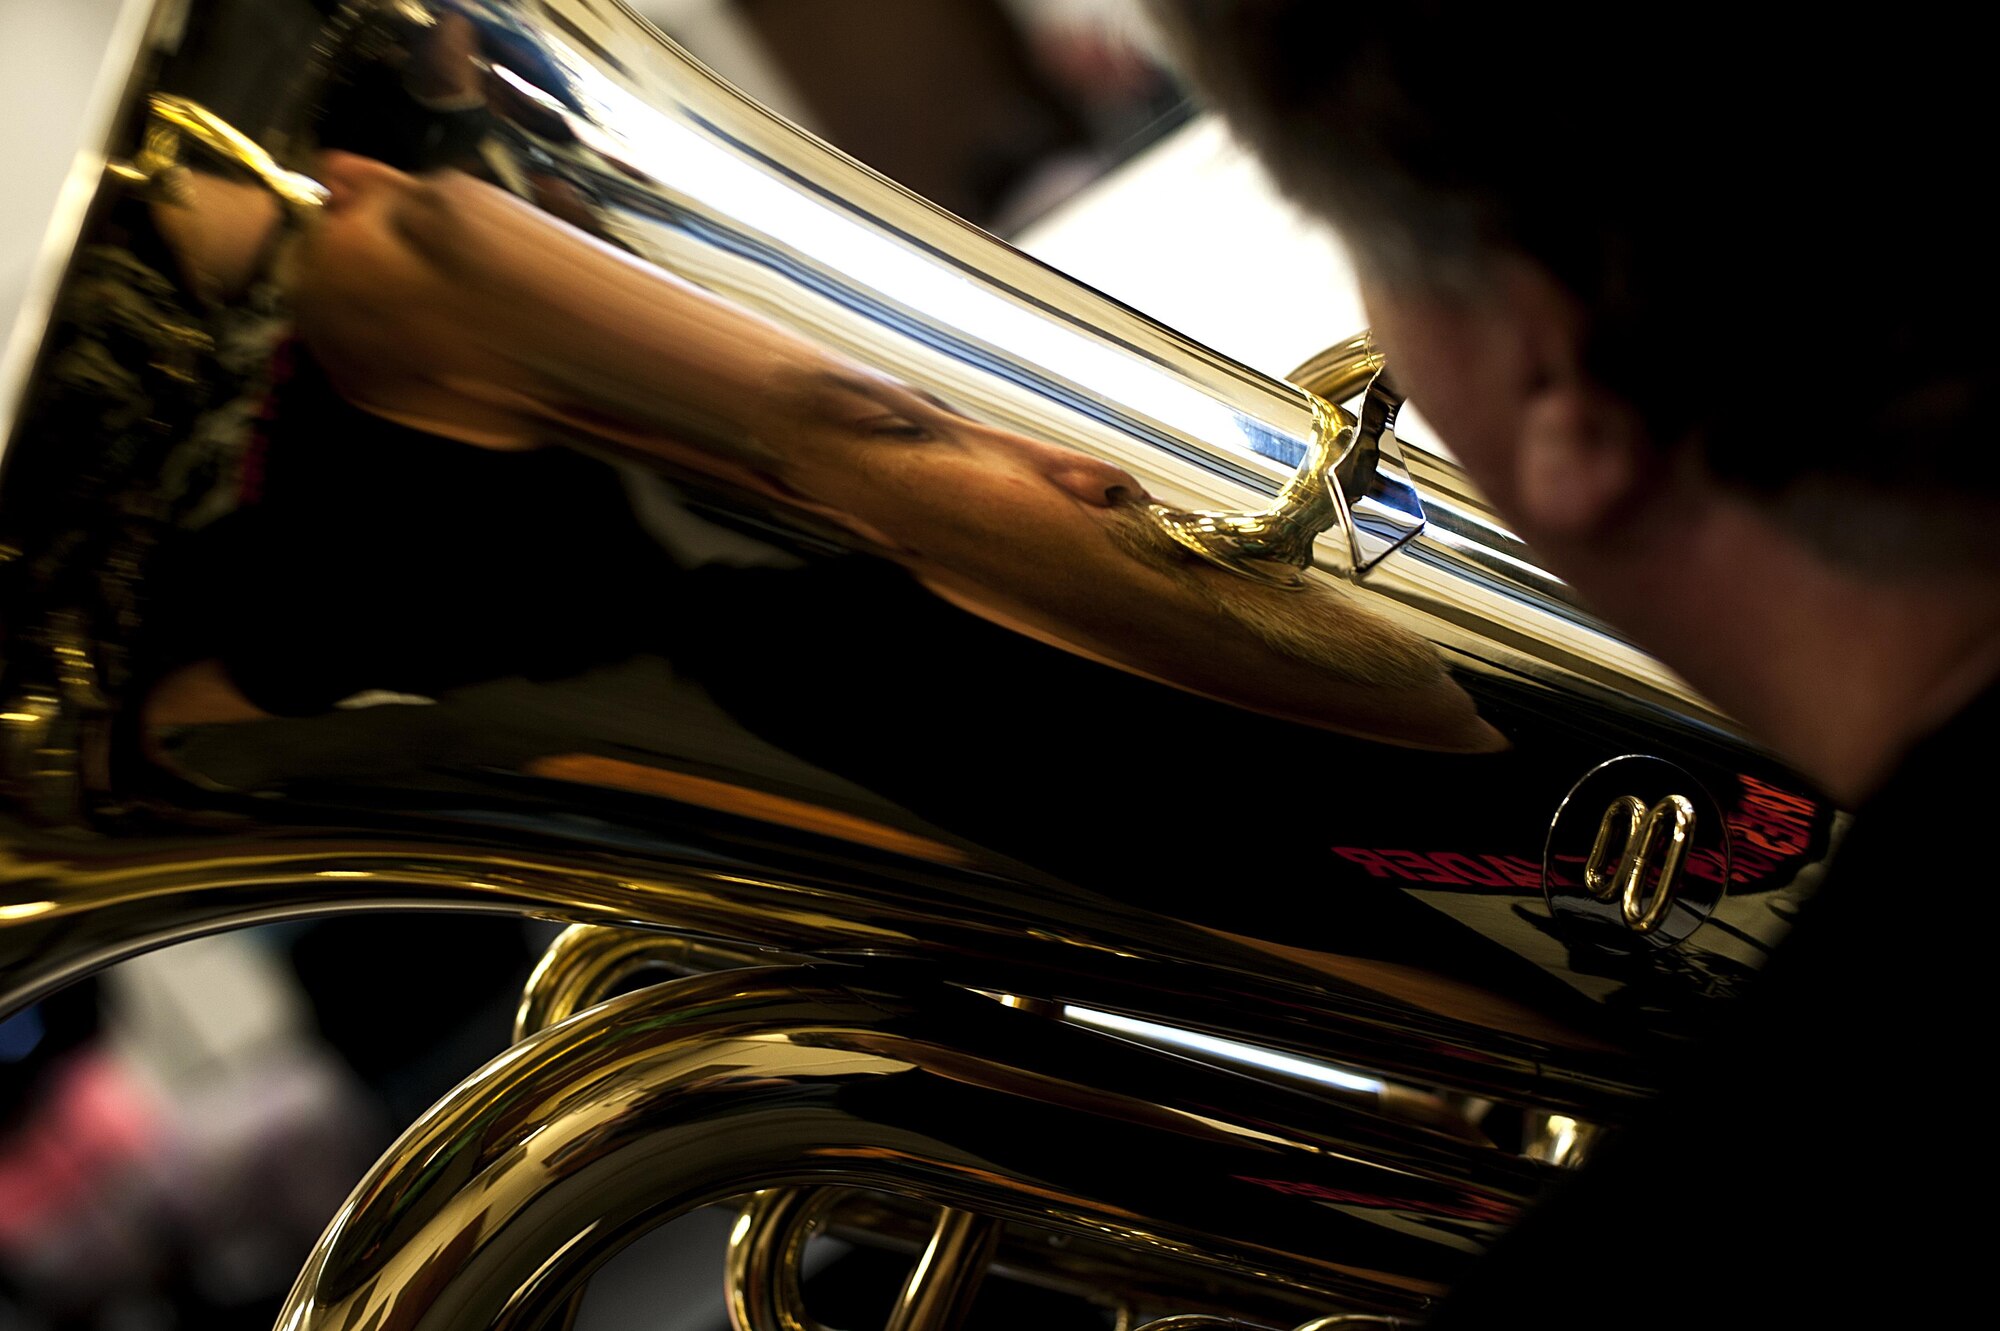 Eric T. Hansen, 17th Training Group security systems operations, practices his tuba during a band practice in the band hall at Angelo State University, San Angelo, Texas, July 28, 2015. The San Angelo Community plays two shows a year, one in August and one in late December. (U.S. Air Force photo by Senior Airman Scott Jackson/Released)